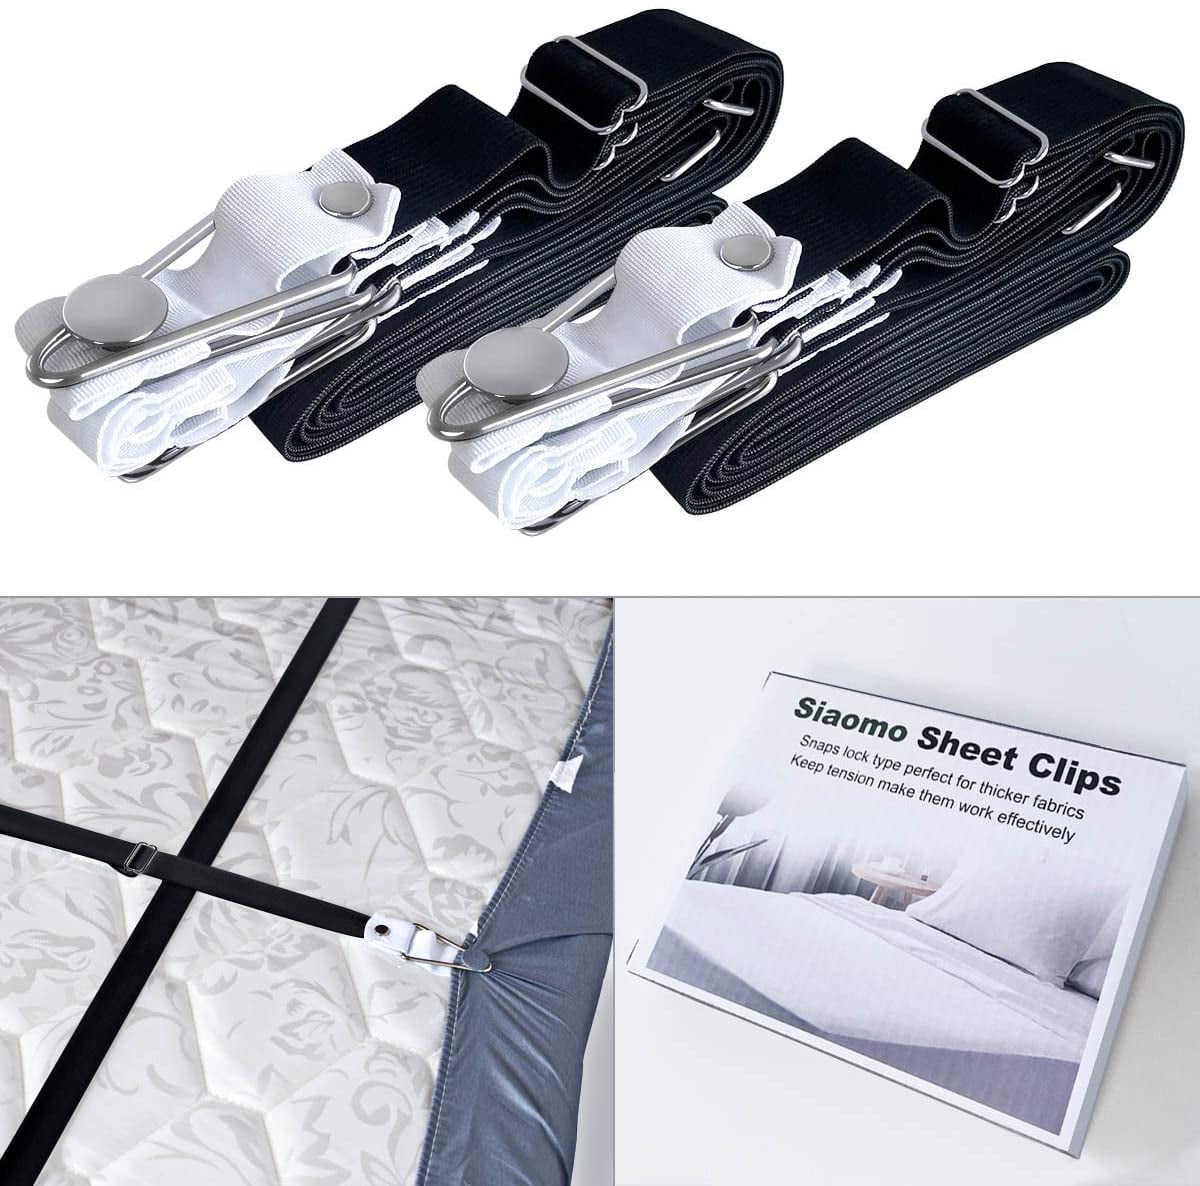 White Sheet Holder Bed Sheet Straps Clips 4 Pack Triangle Bed Sheet Straps Fasteners Set 3 Ways Mattress Corner Suspenders Grippers Holders for Mattress Pad Corner Crib 